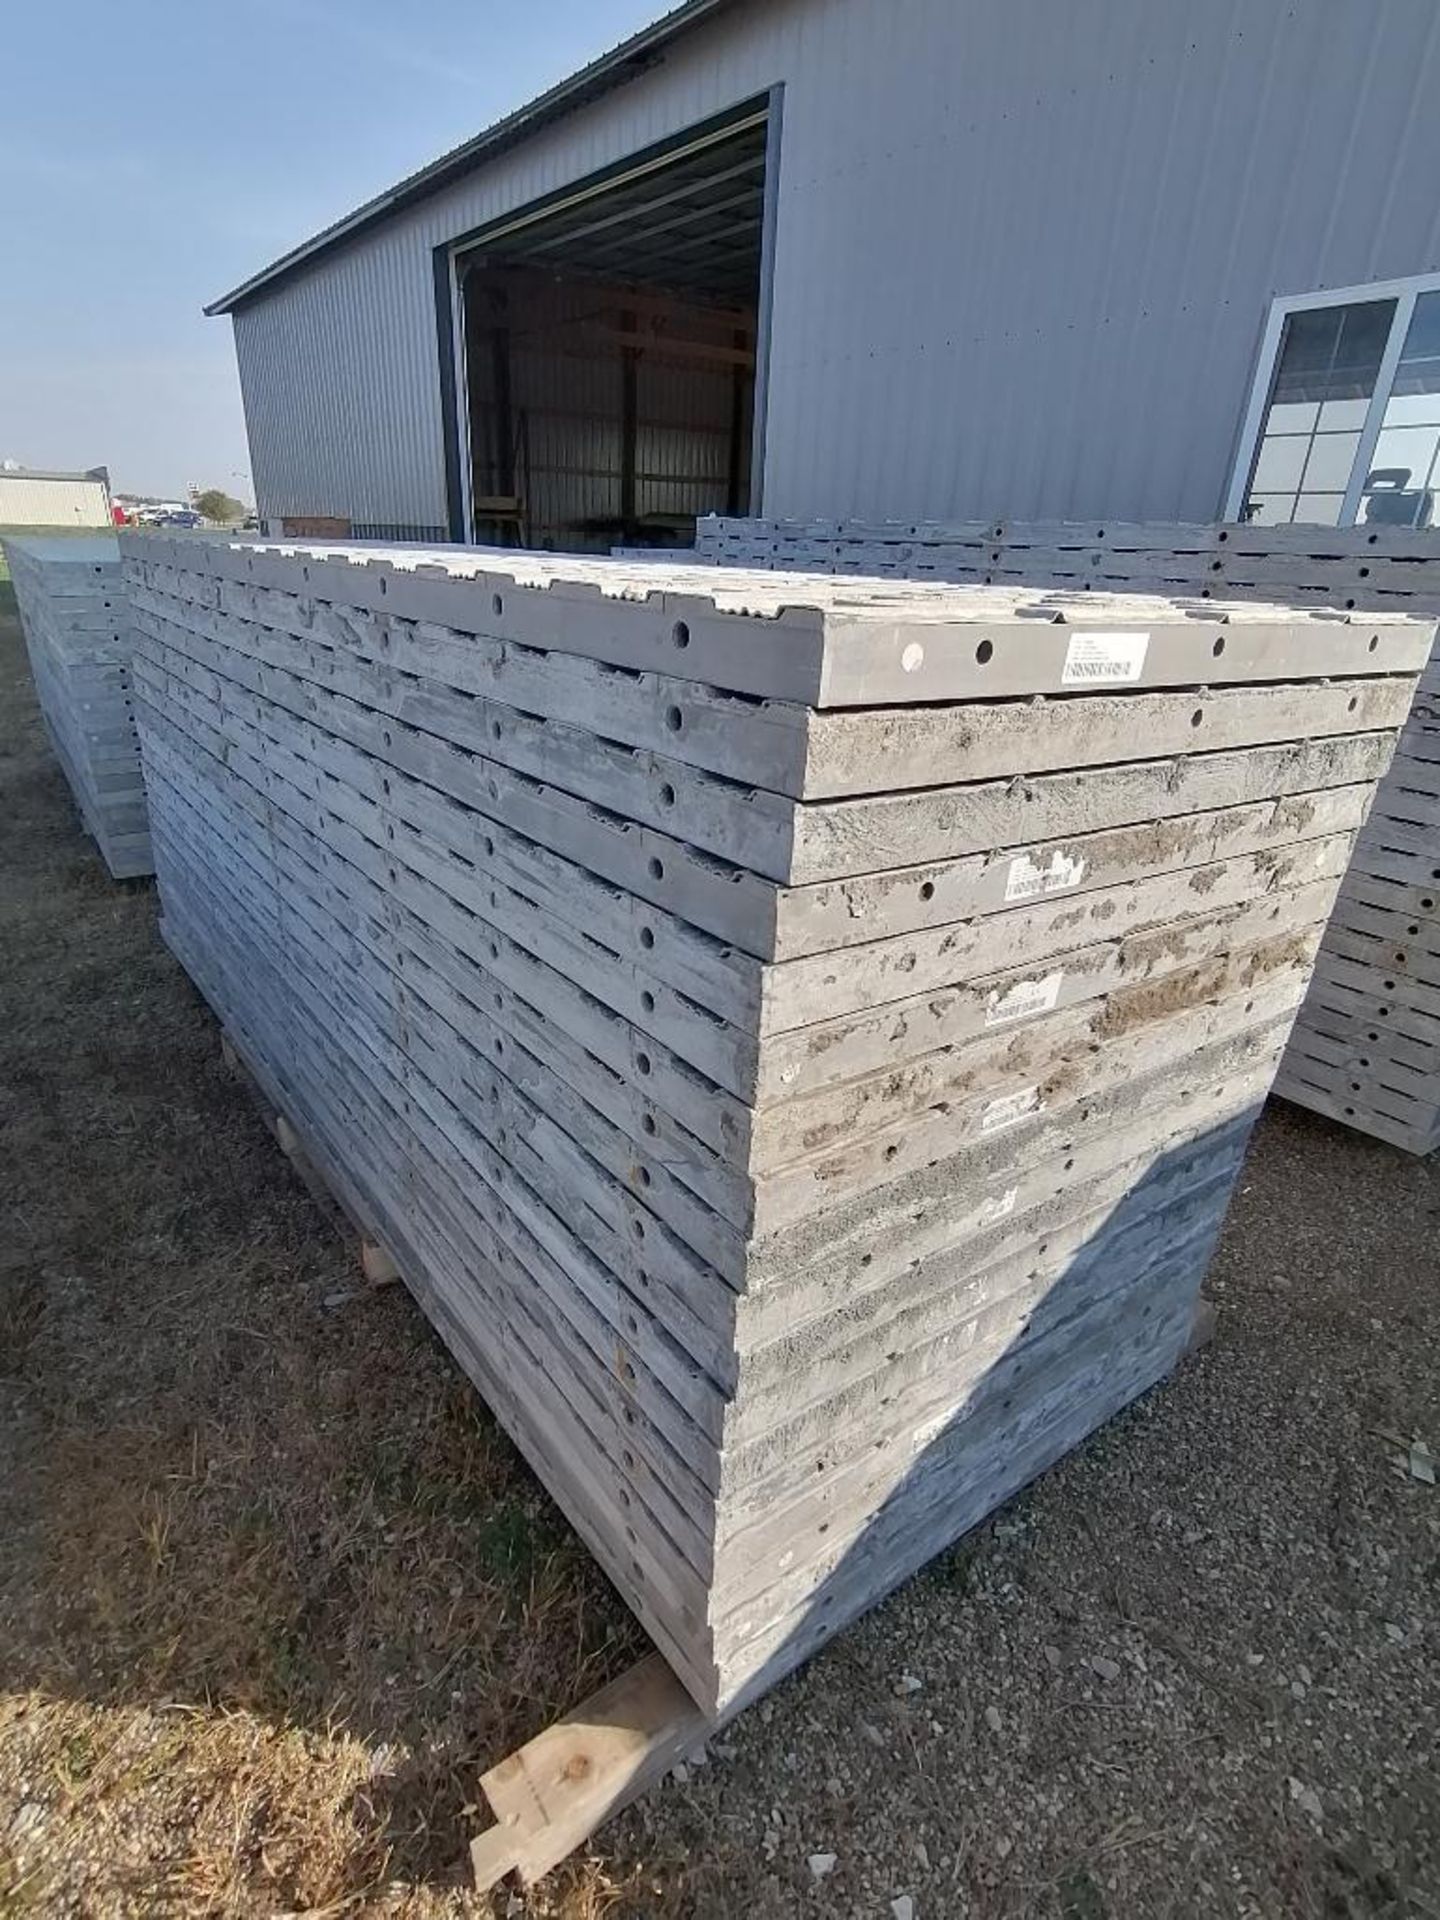 (19) 36" x 9' Precise Textured Brick Aluminum Concrete Forms 6-12 Hole Pattern. Located in Woodbine, - Image 3 of 7